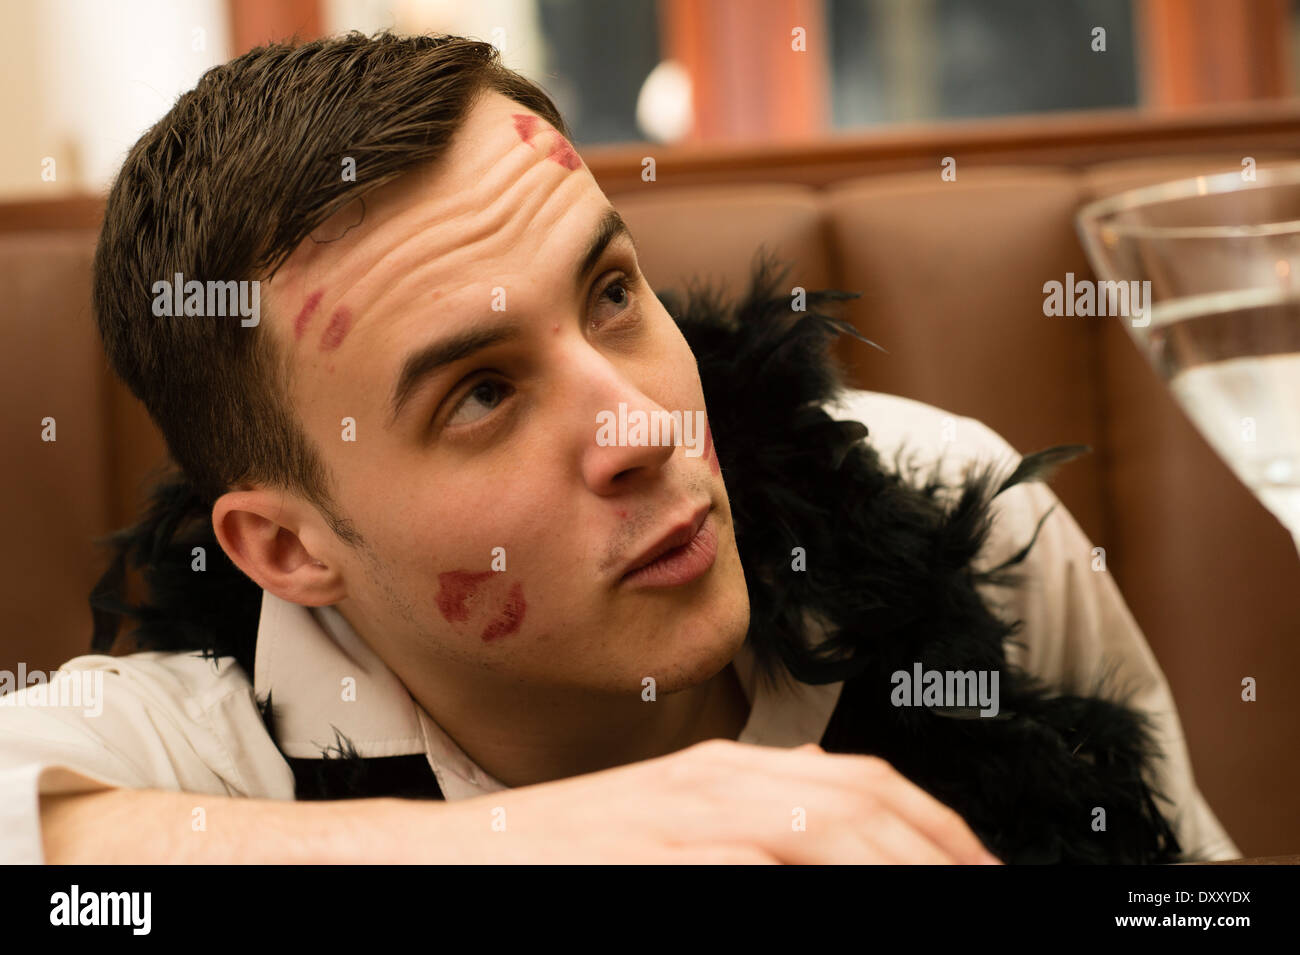 Young man men boy with lipstick kisses on his face modeling for a 'Great  Gatsby' themed makeover photo shoot, UK Stock Photo - Alamy